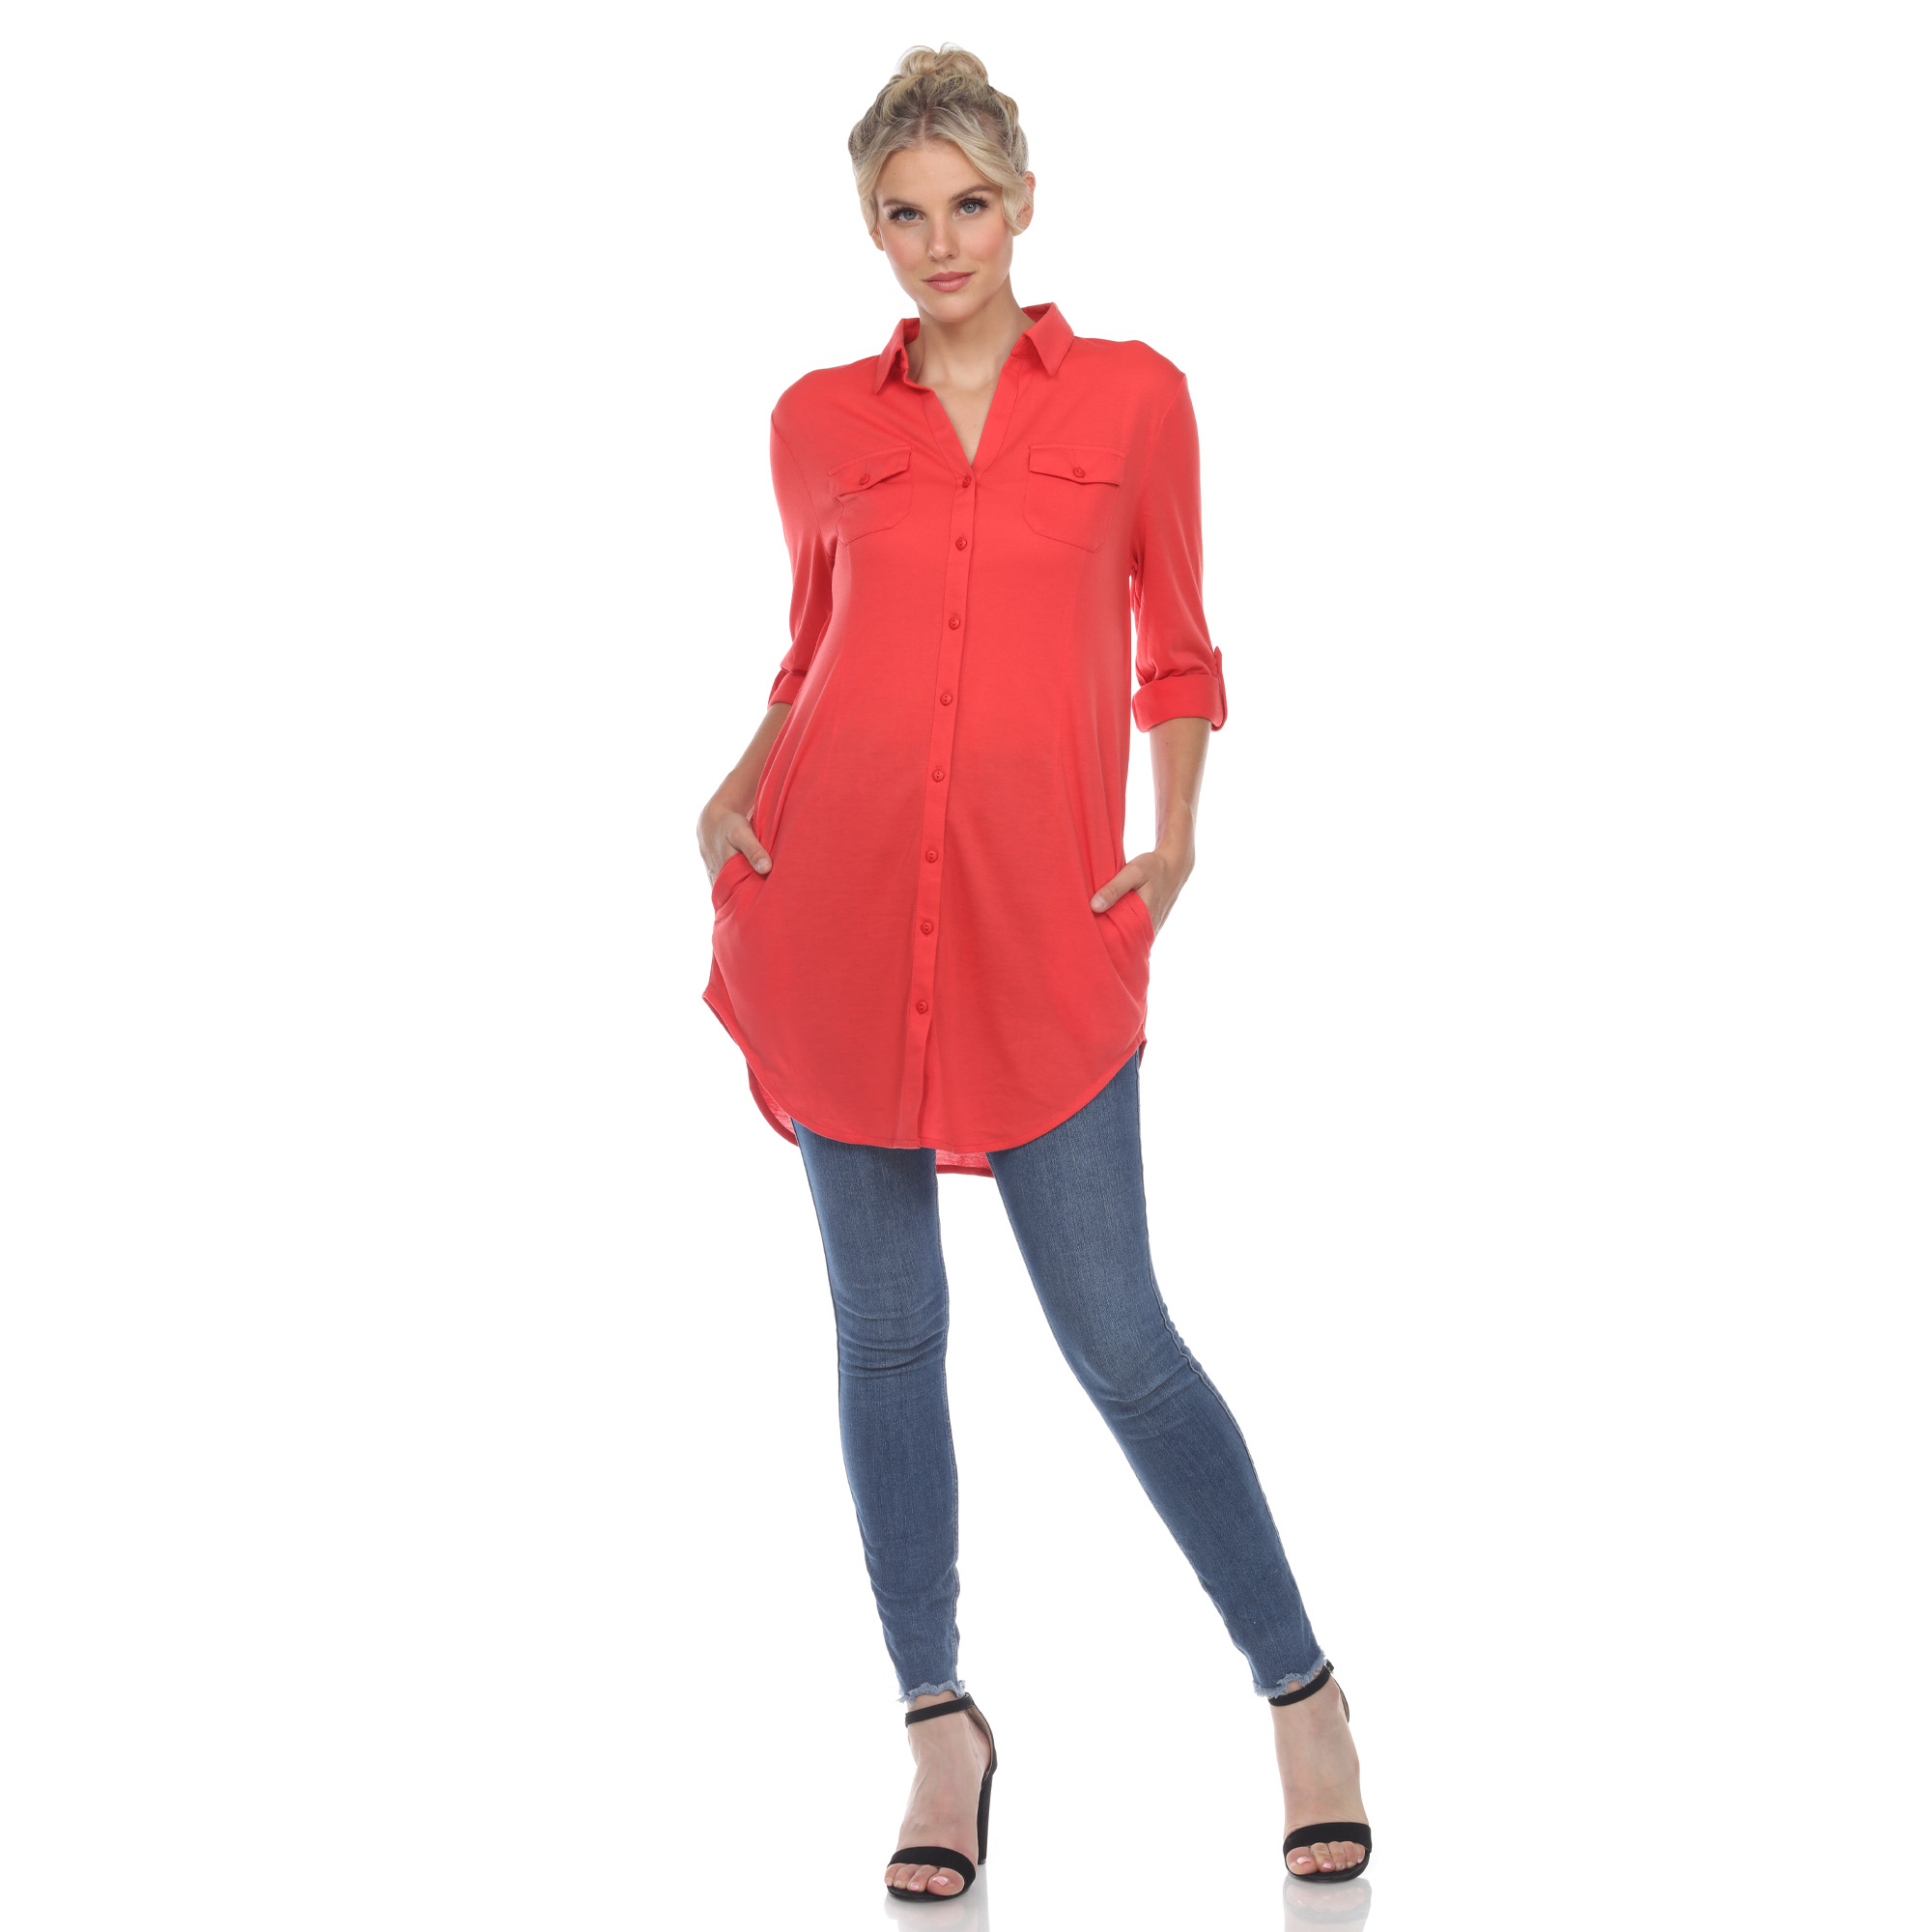 White Mark Women's Stretchy Quarter Sleeve Button Down Tunic Top With Pockets - Red, 2X